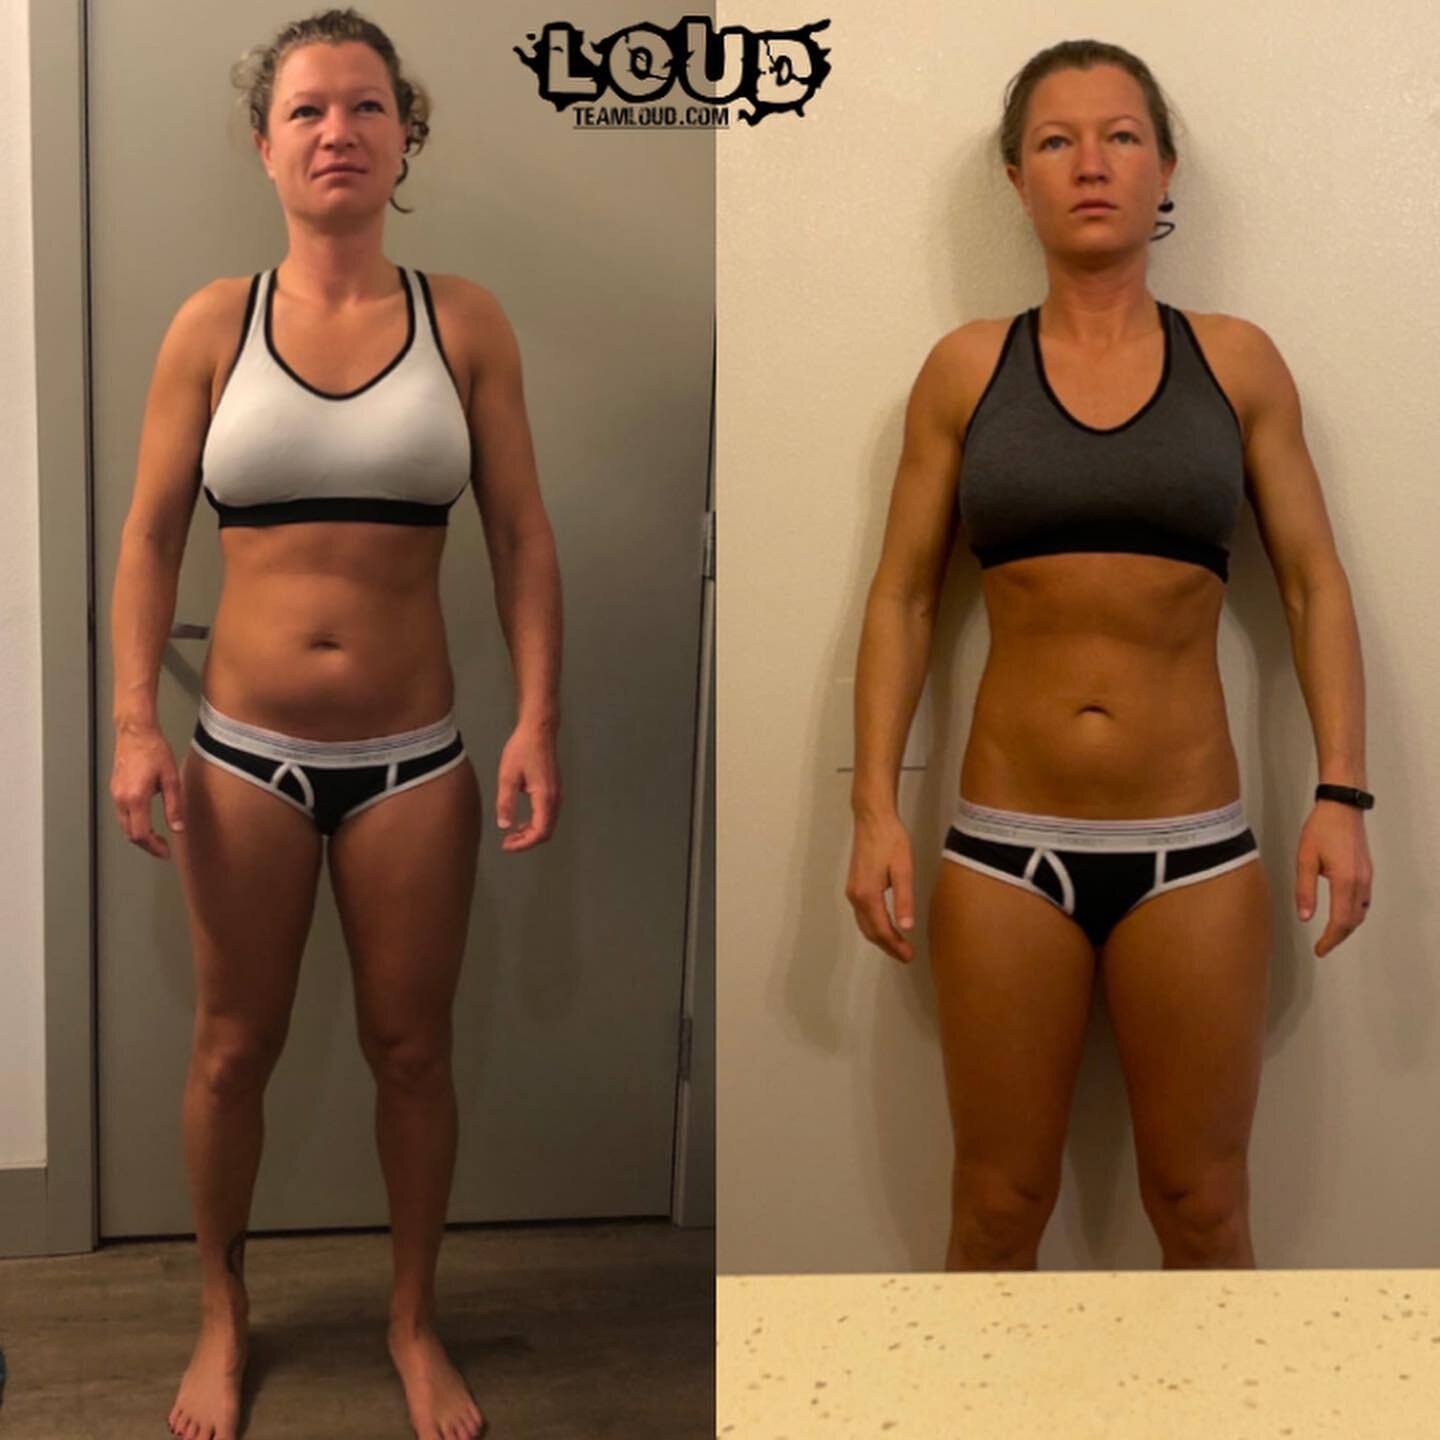 Shout out to @jenlee.pnw on her fantastic 4 month transformation!
➖
Jen worked with coach @fitbaileywhit for 4 months to improve her composition and strip off some body fat. She did a great job sticking to the plan from day 1 and her hard work showed